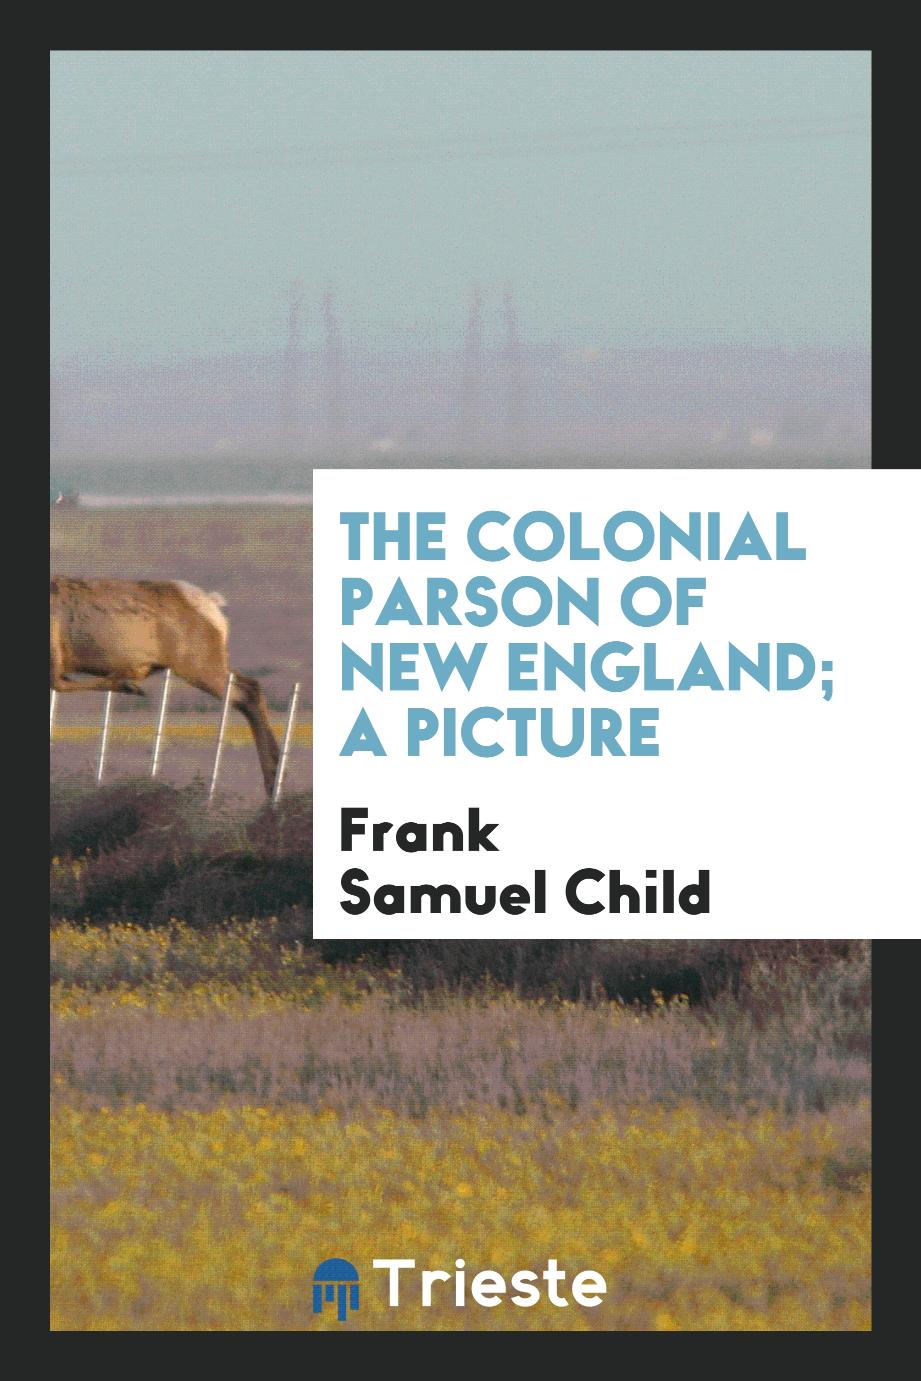 Frank Samuel Child - The colonial parson of New England; a picture